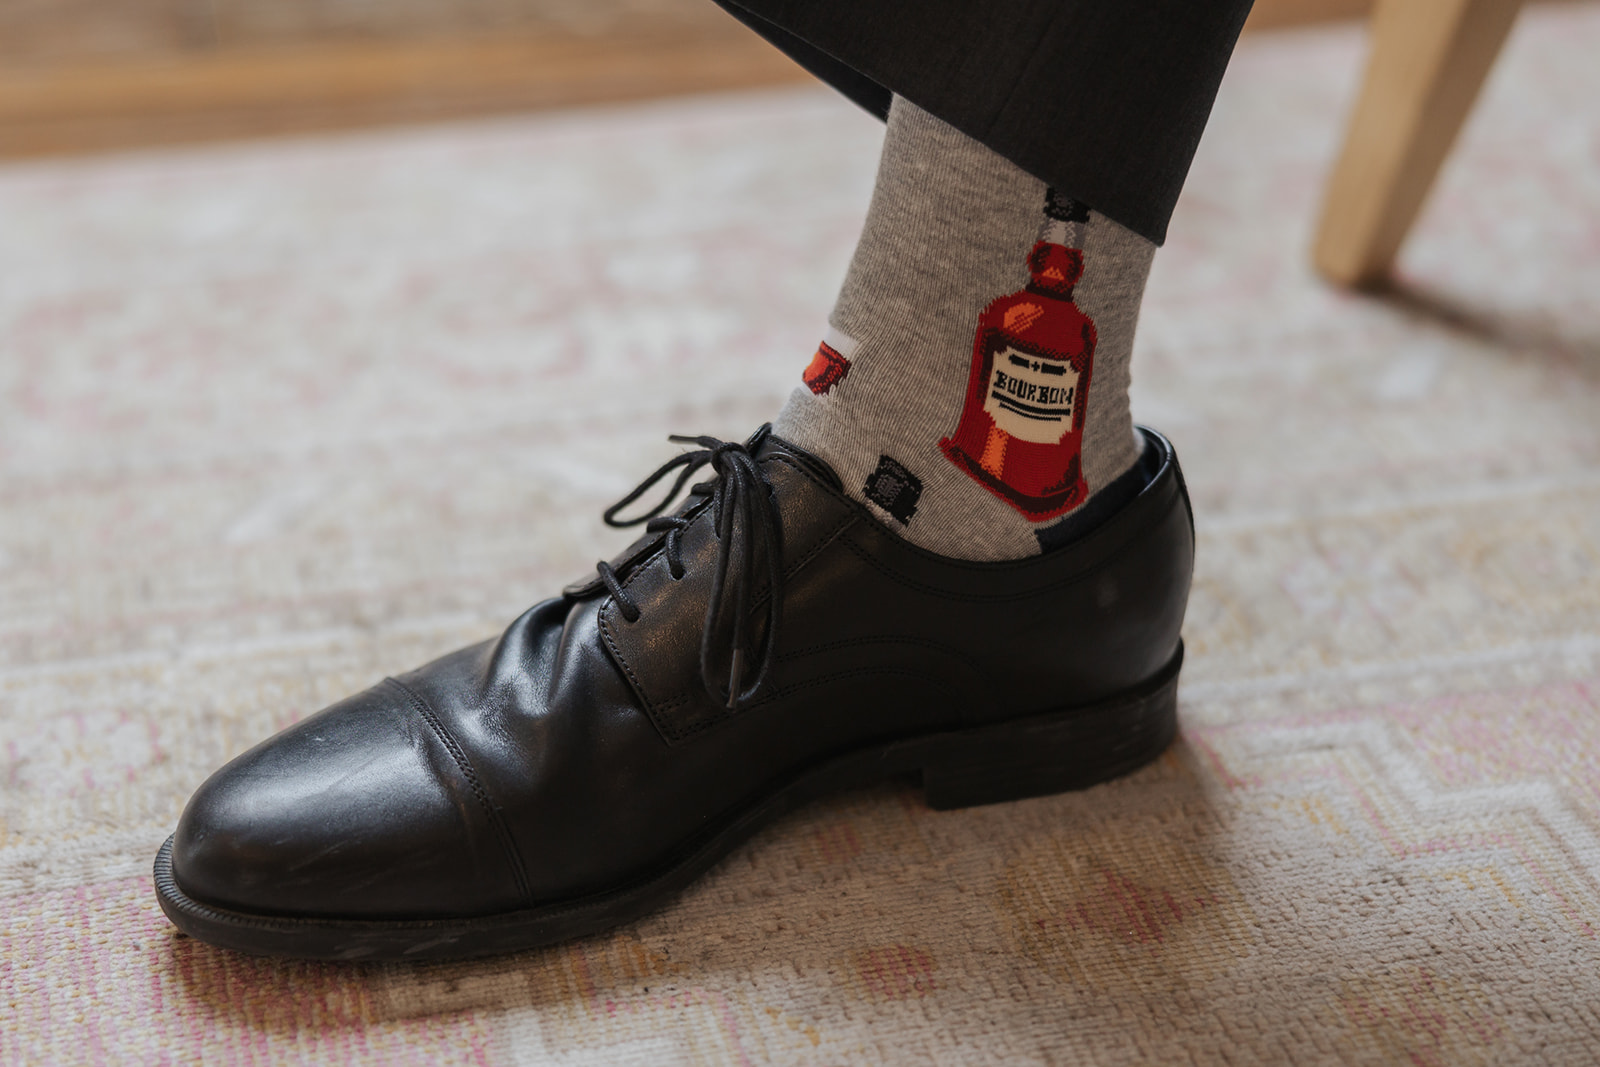 Groom shows off his hand picked socks for his wedding day